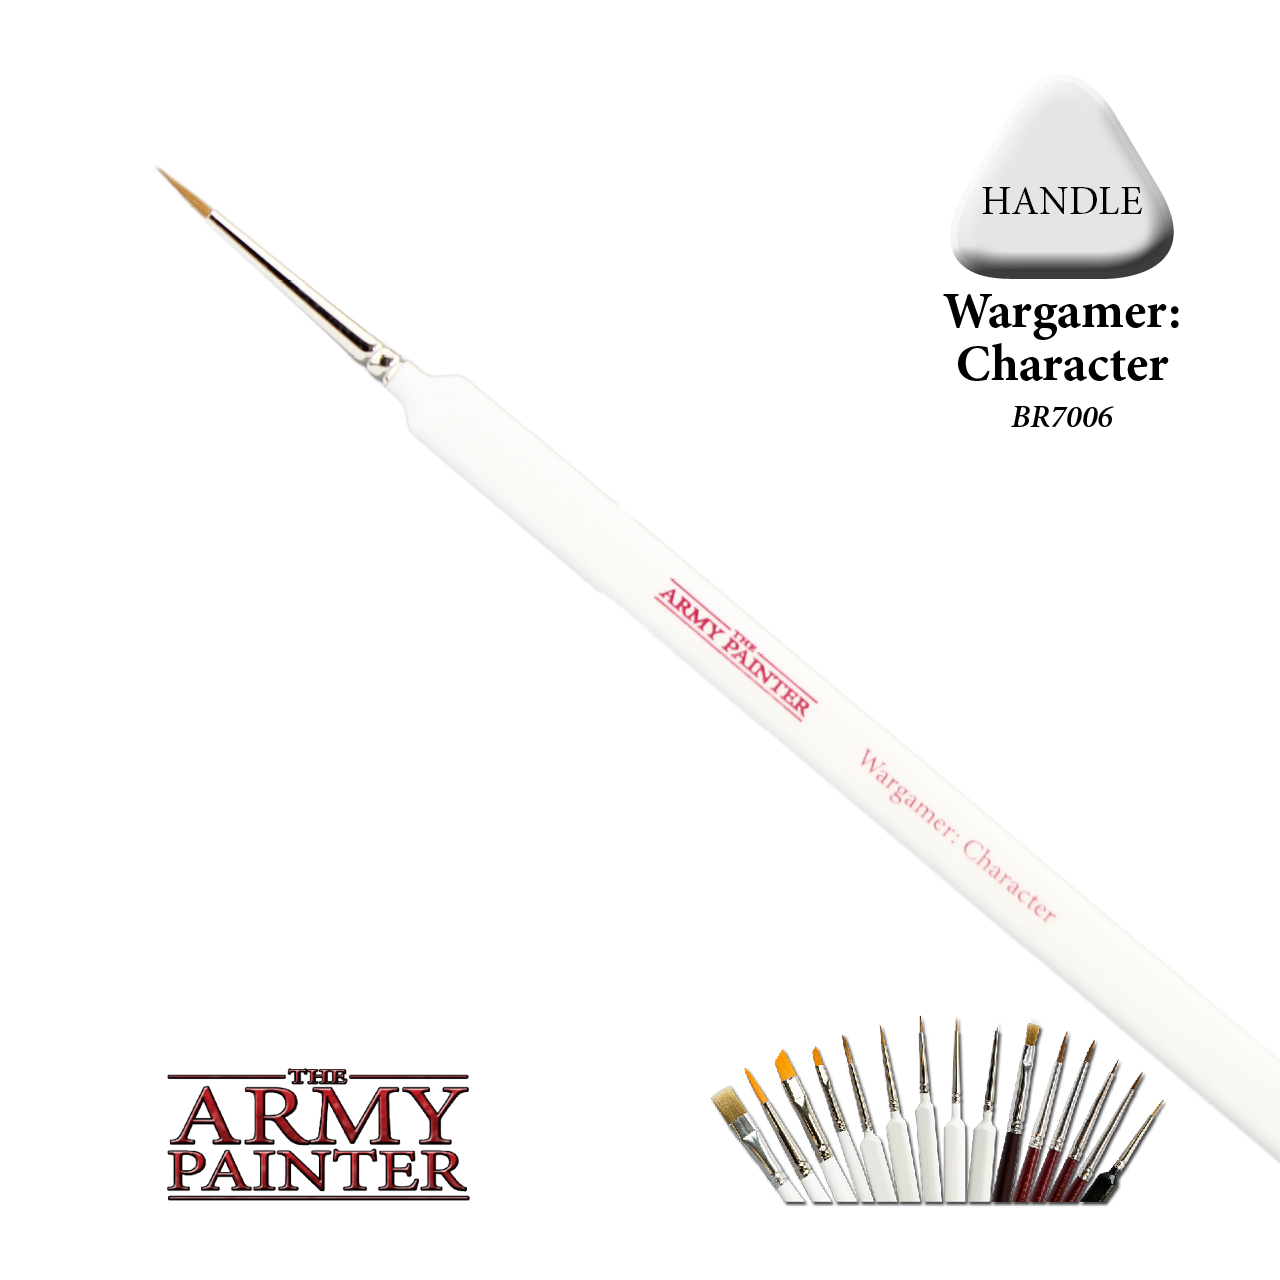 Army painter Brush | Boutique FDB